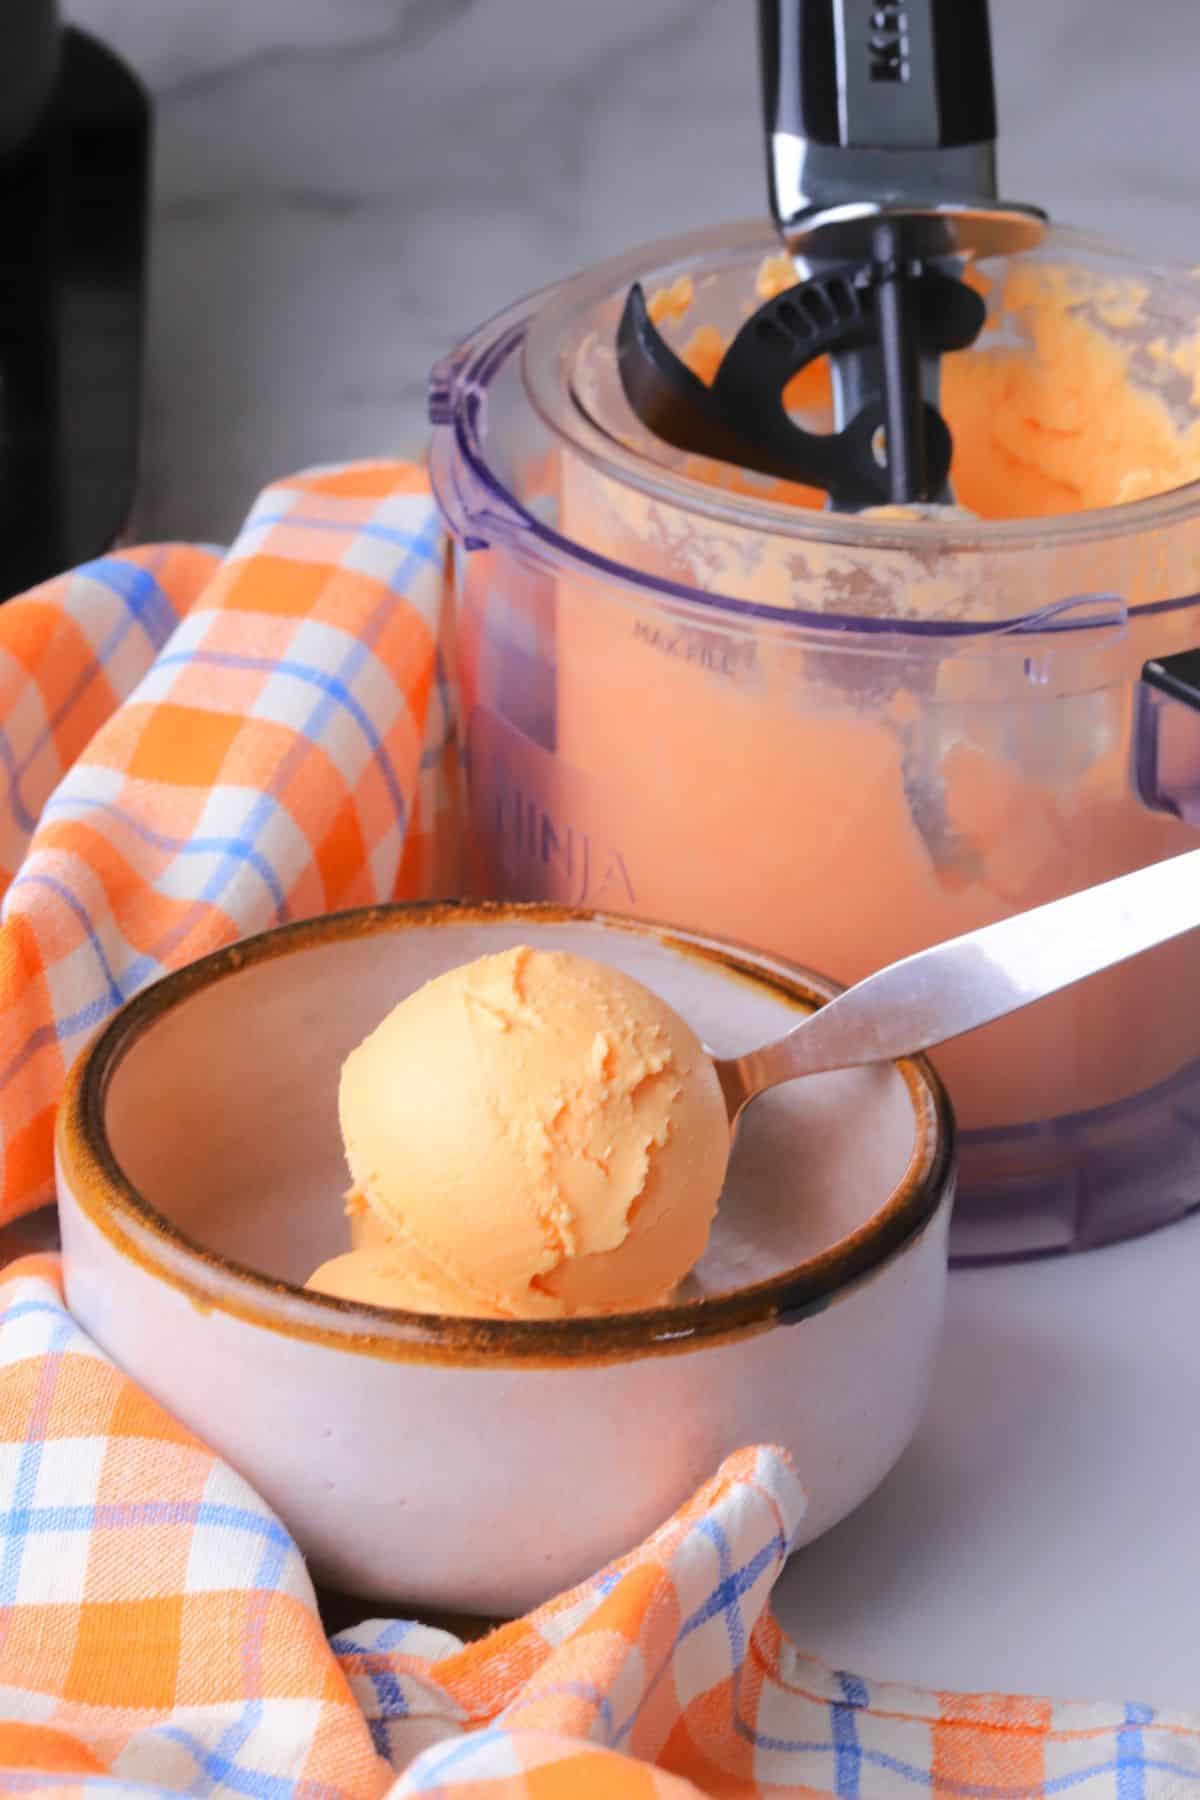 A bowl of sugar free orange creamsicle ice cream next to a creami pint with an ice cream scoop.